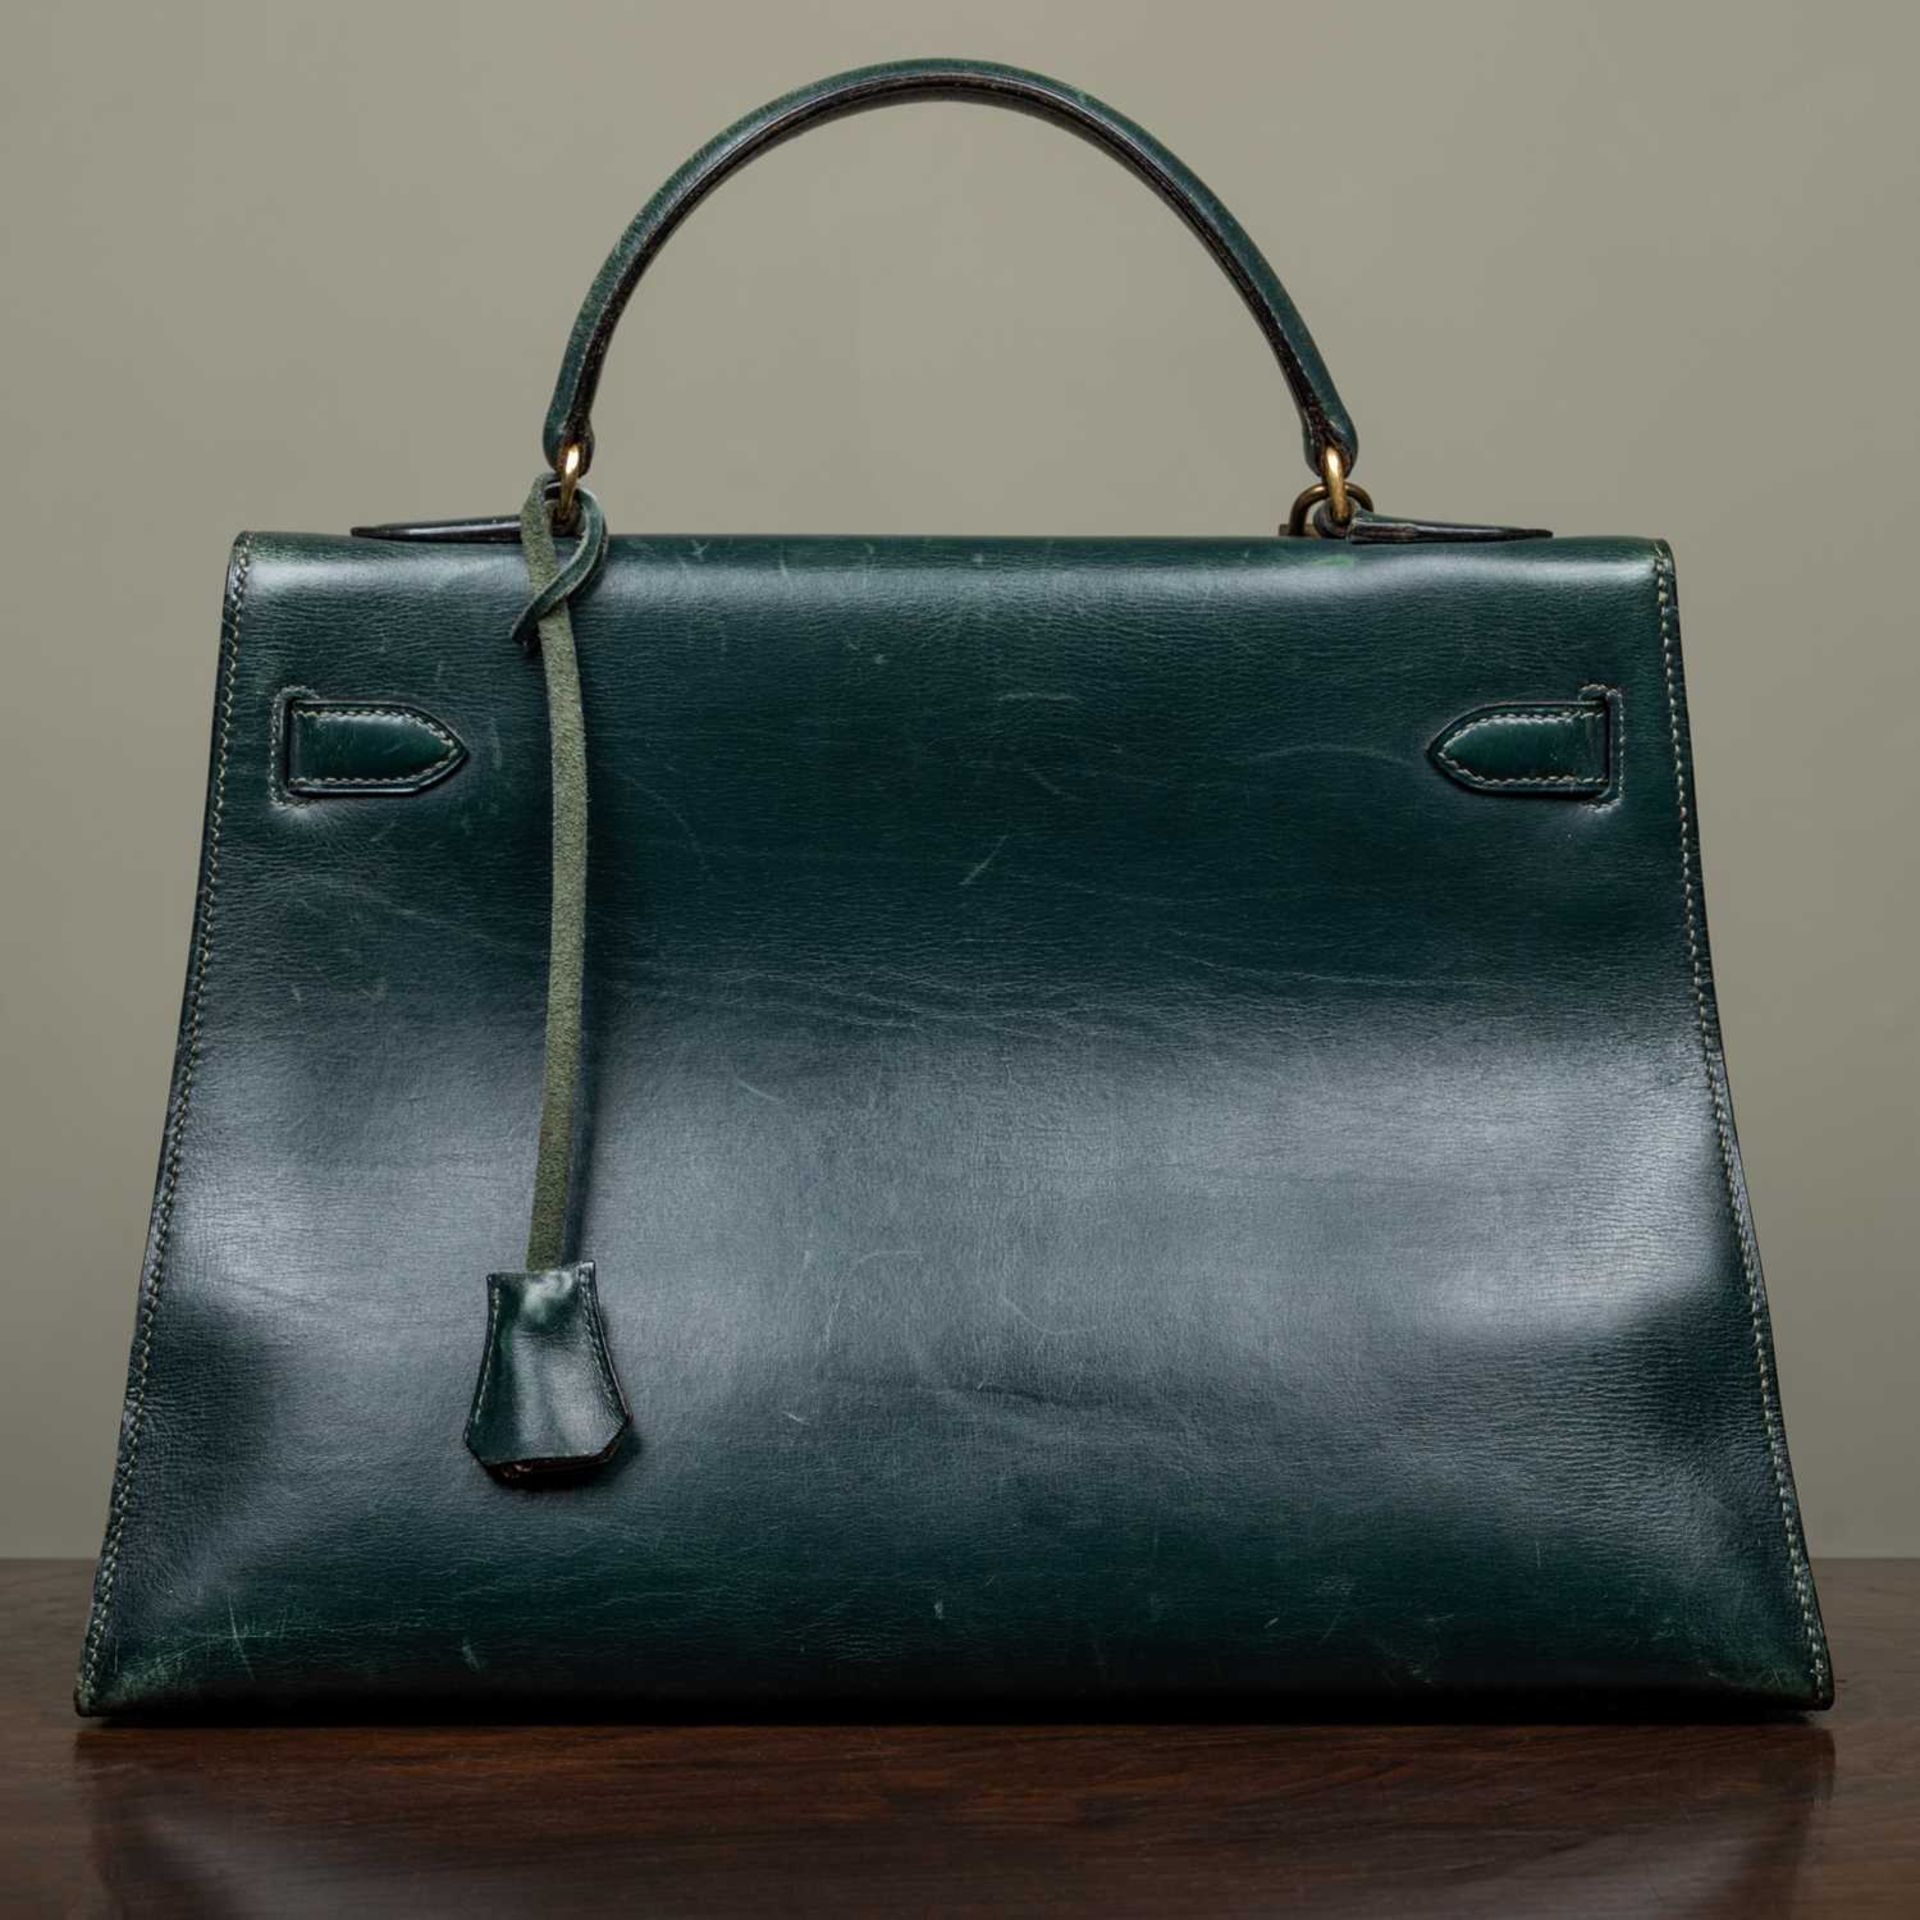 A Hermès 'Kelly' green leather handbag and matching jewellery case, the bag 33cm wide at the base - Image 5 of 18